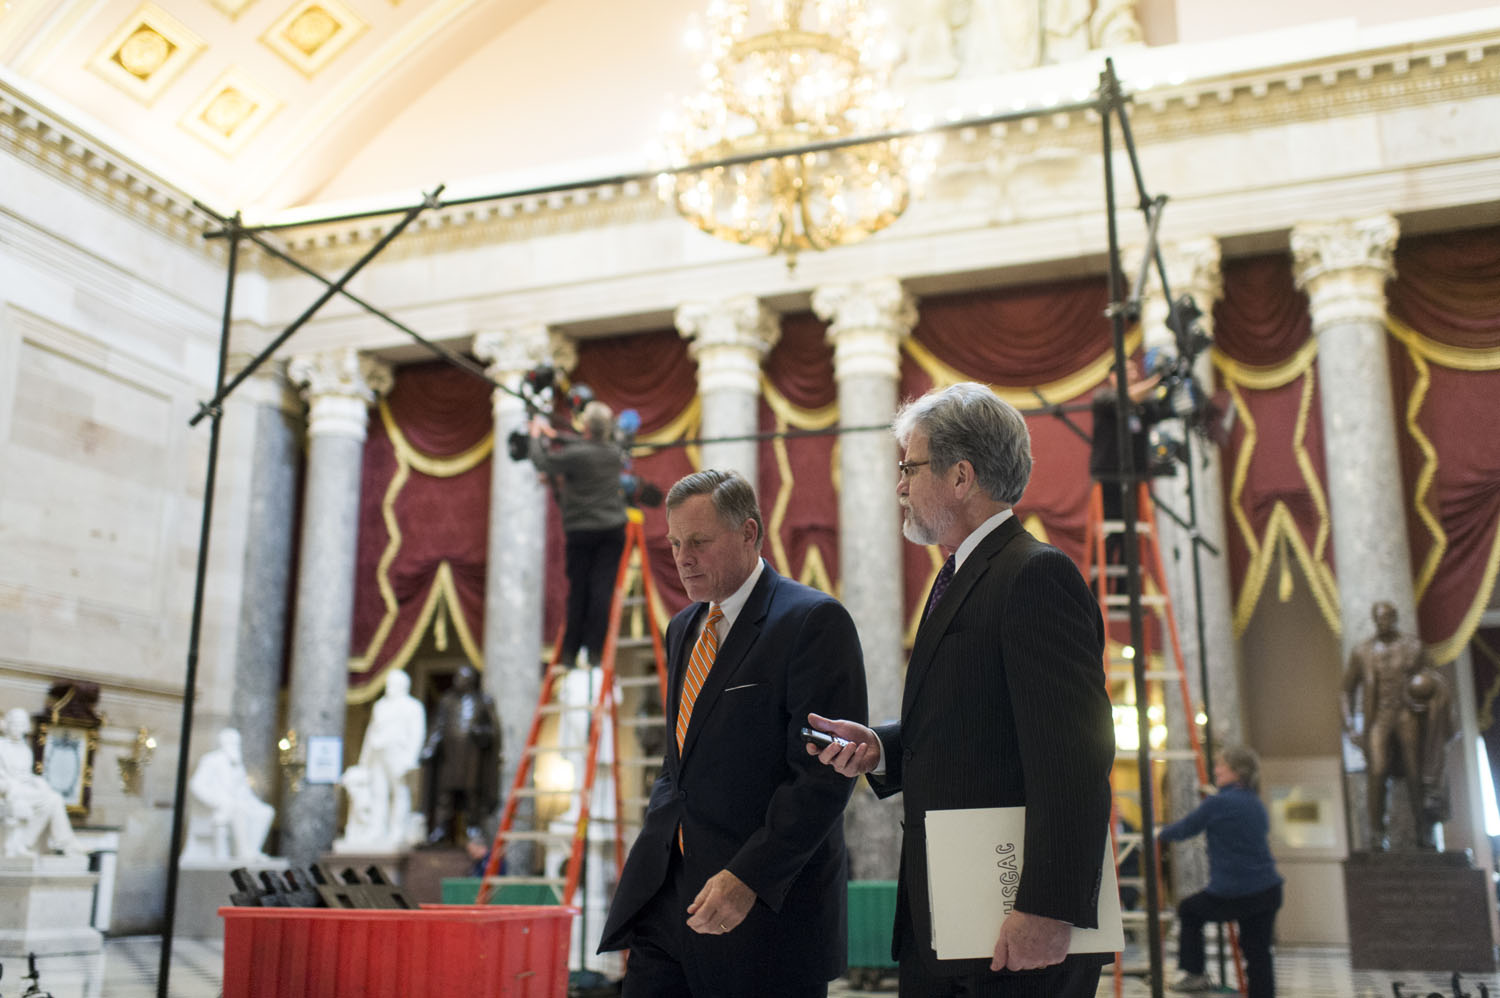 From left: Senator Richard Burr and Senator Tom Coburn walk through Statuary Hall in the Capitol ahead of the State of the Union on Jan. 28, 2014 in Washington, D.C. (Bill Clark—CQ-Roll Call/Getty Images)